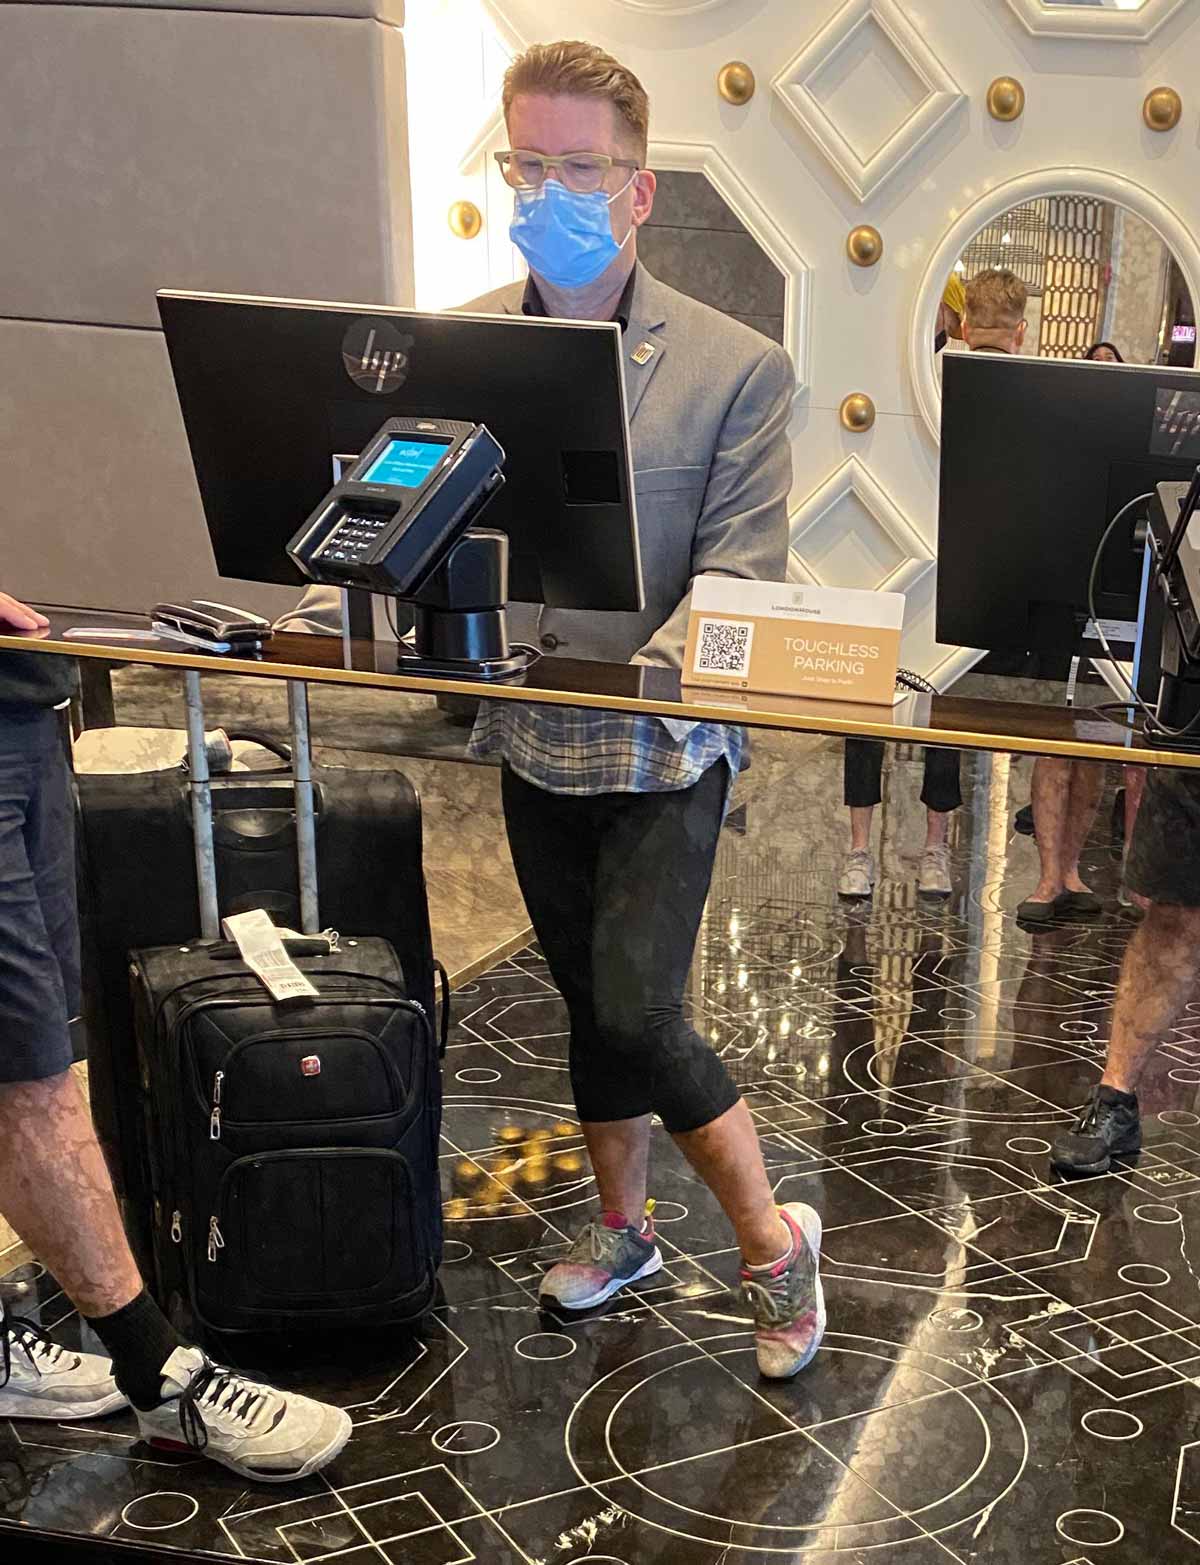 The reflection in the mirror on this hotel check-in desk